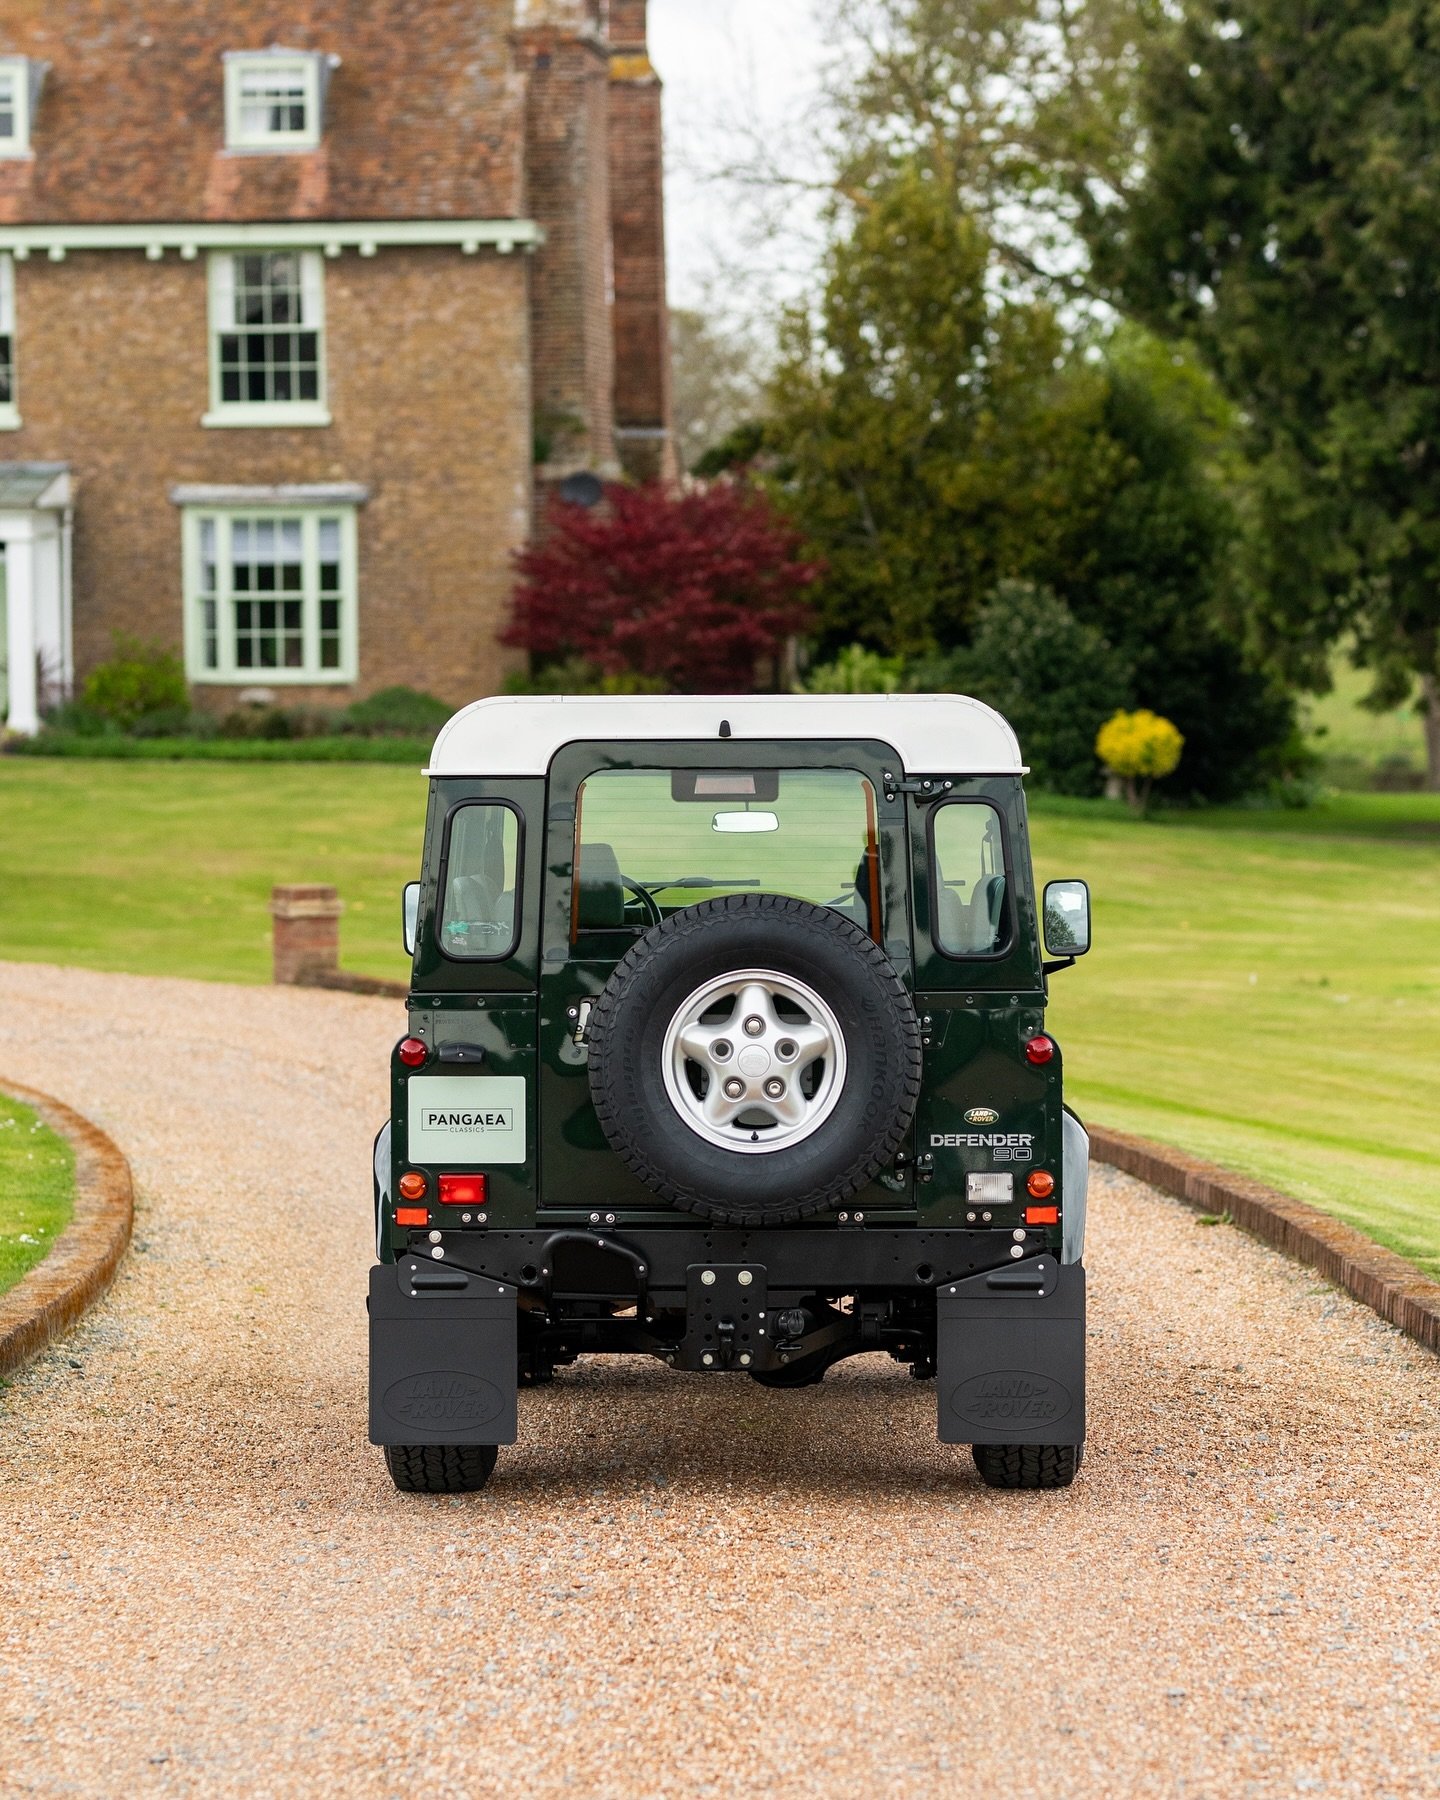 It ticks all the right boxes with its mileage, ownership and originality. Defender&rsquo;s don&rsquo;t get much better!

1998 Land Rover Defender 90 - Highlander Edition

All the info is on our website, or send us a DM for the link!

#landroverdefend